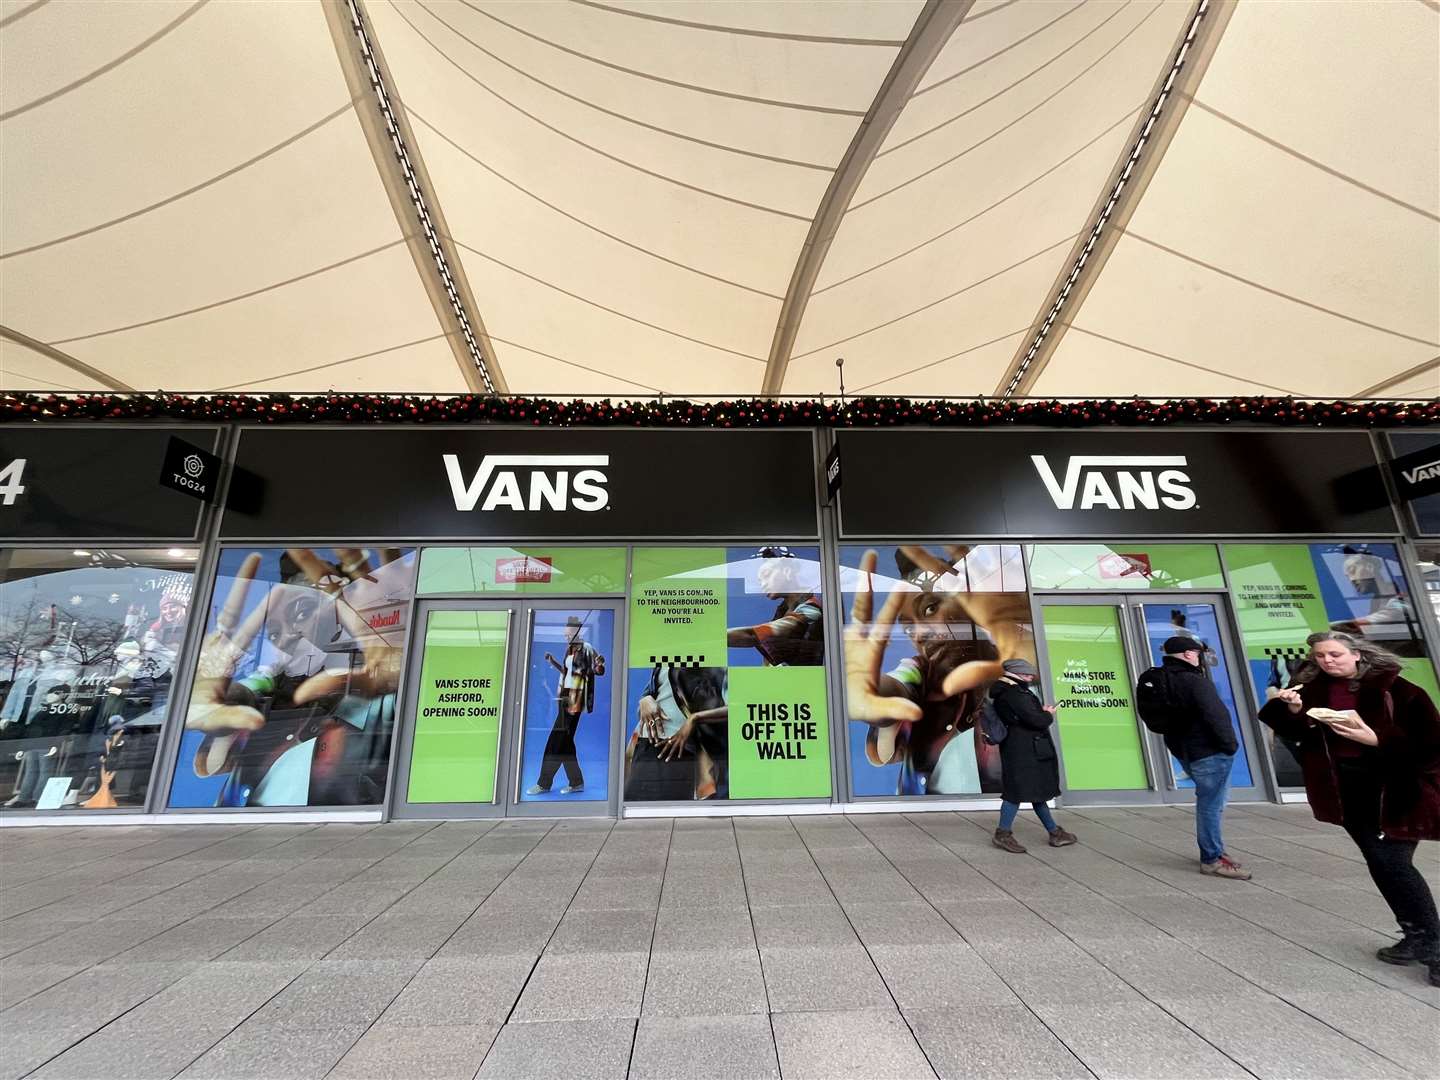 Vans will open next week at the outlet